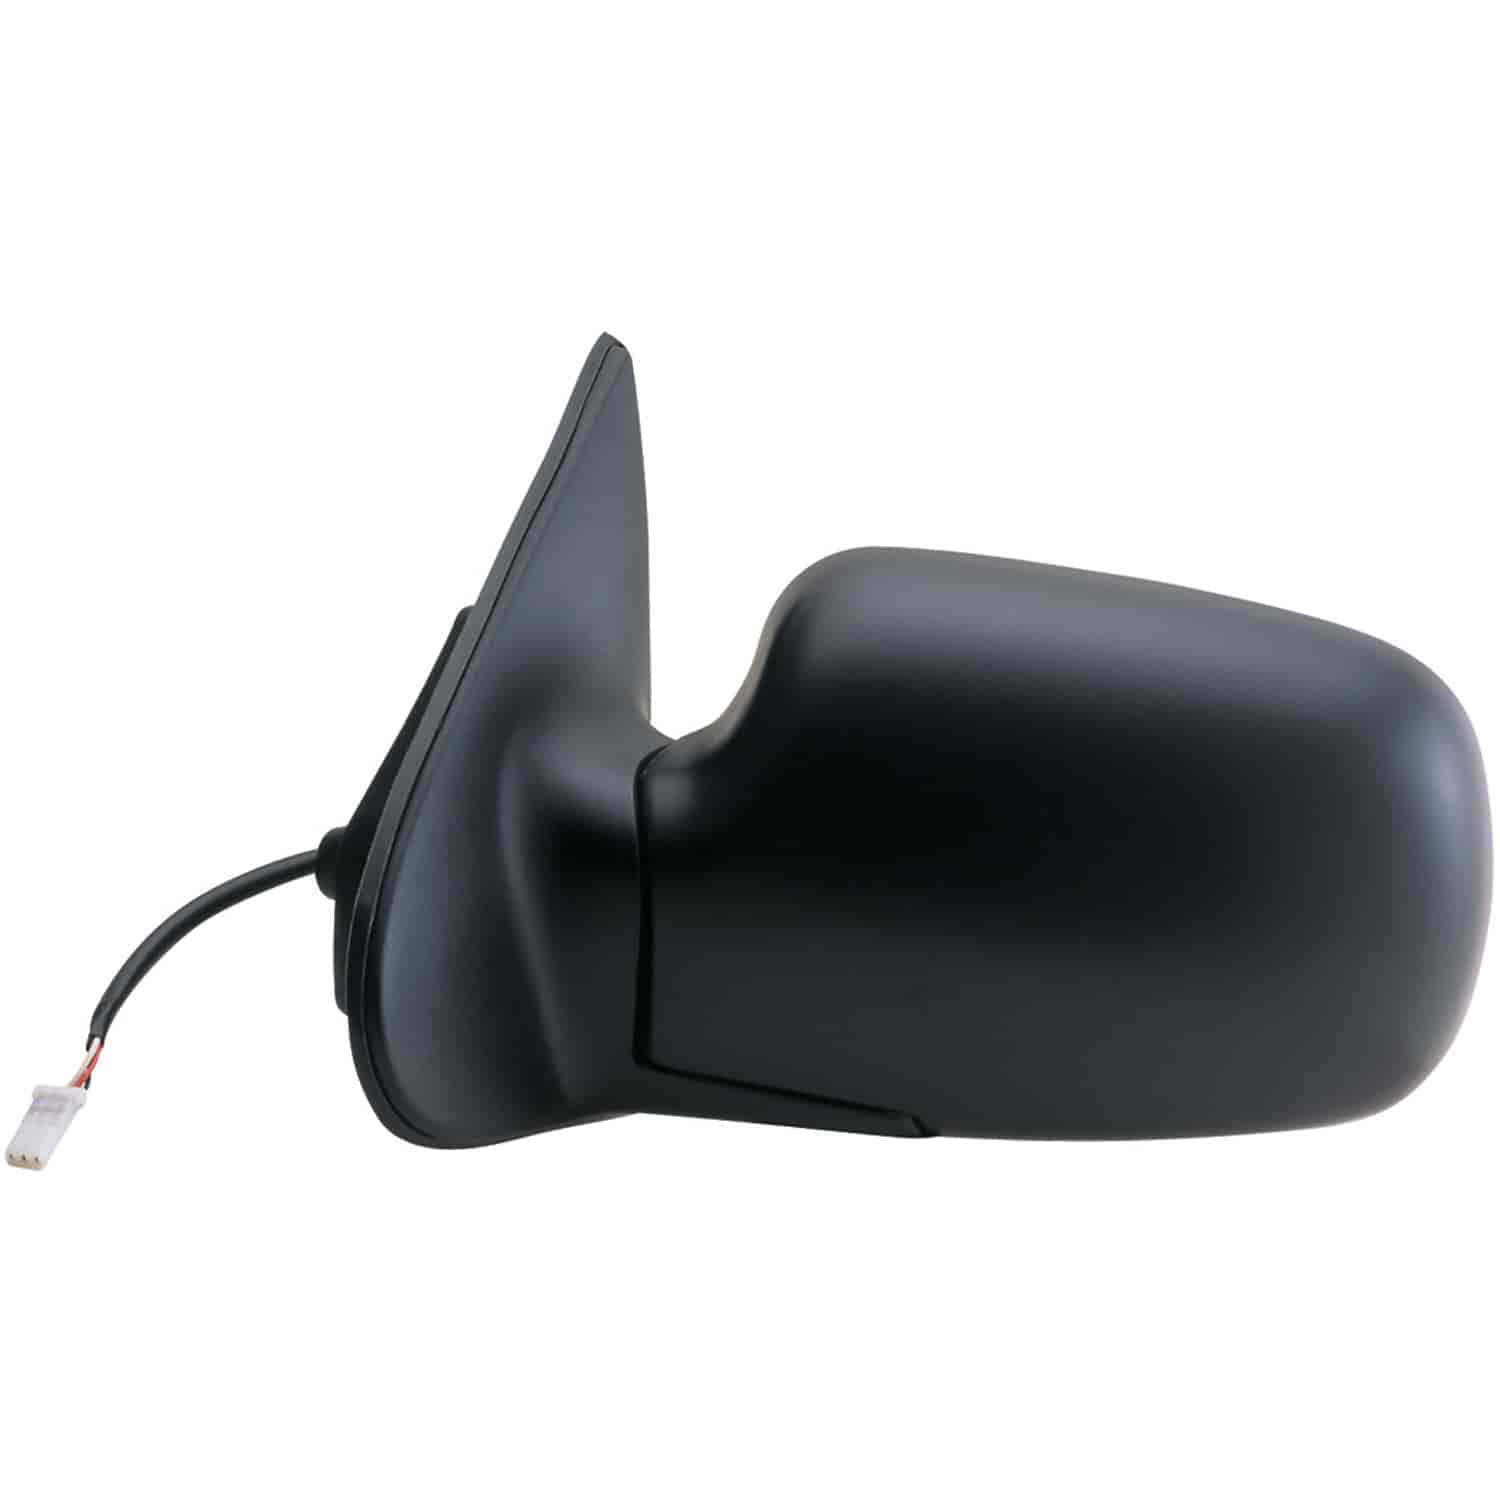 OEM Style Replacement mirror for 93-95 Mercury Villager; Nissan Quest driver side mirror tested to f